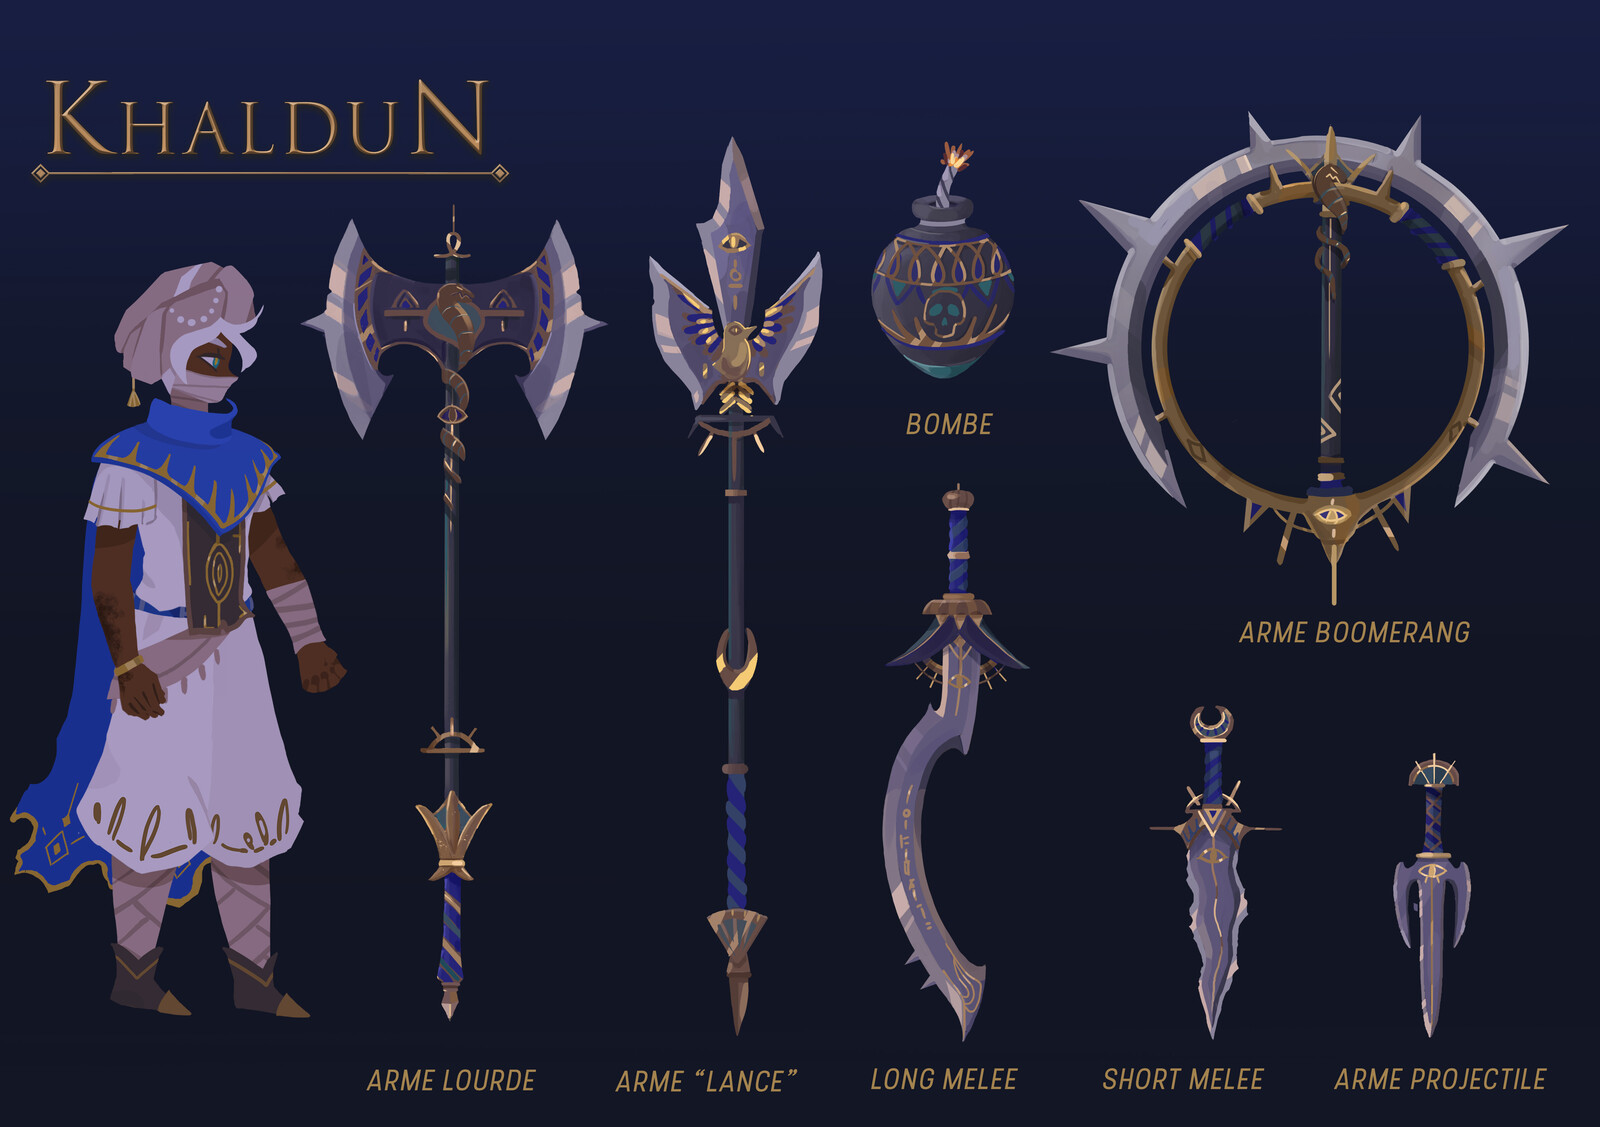 Character and weapon designs